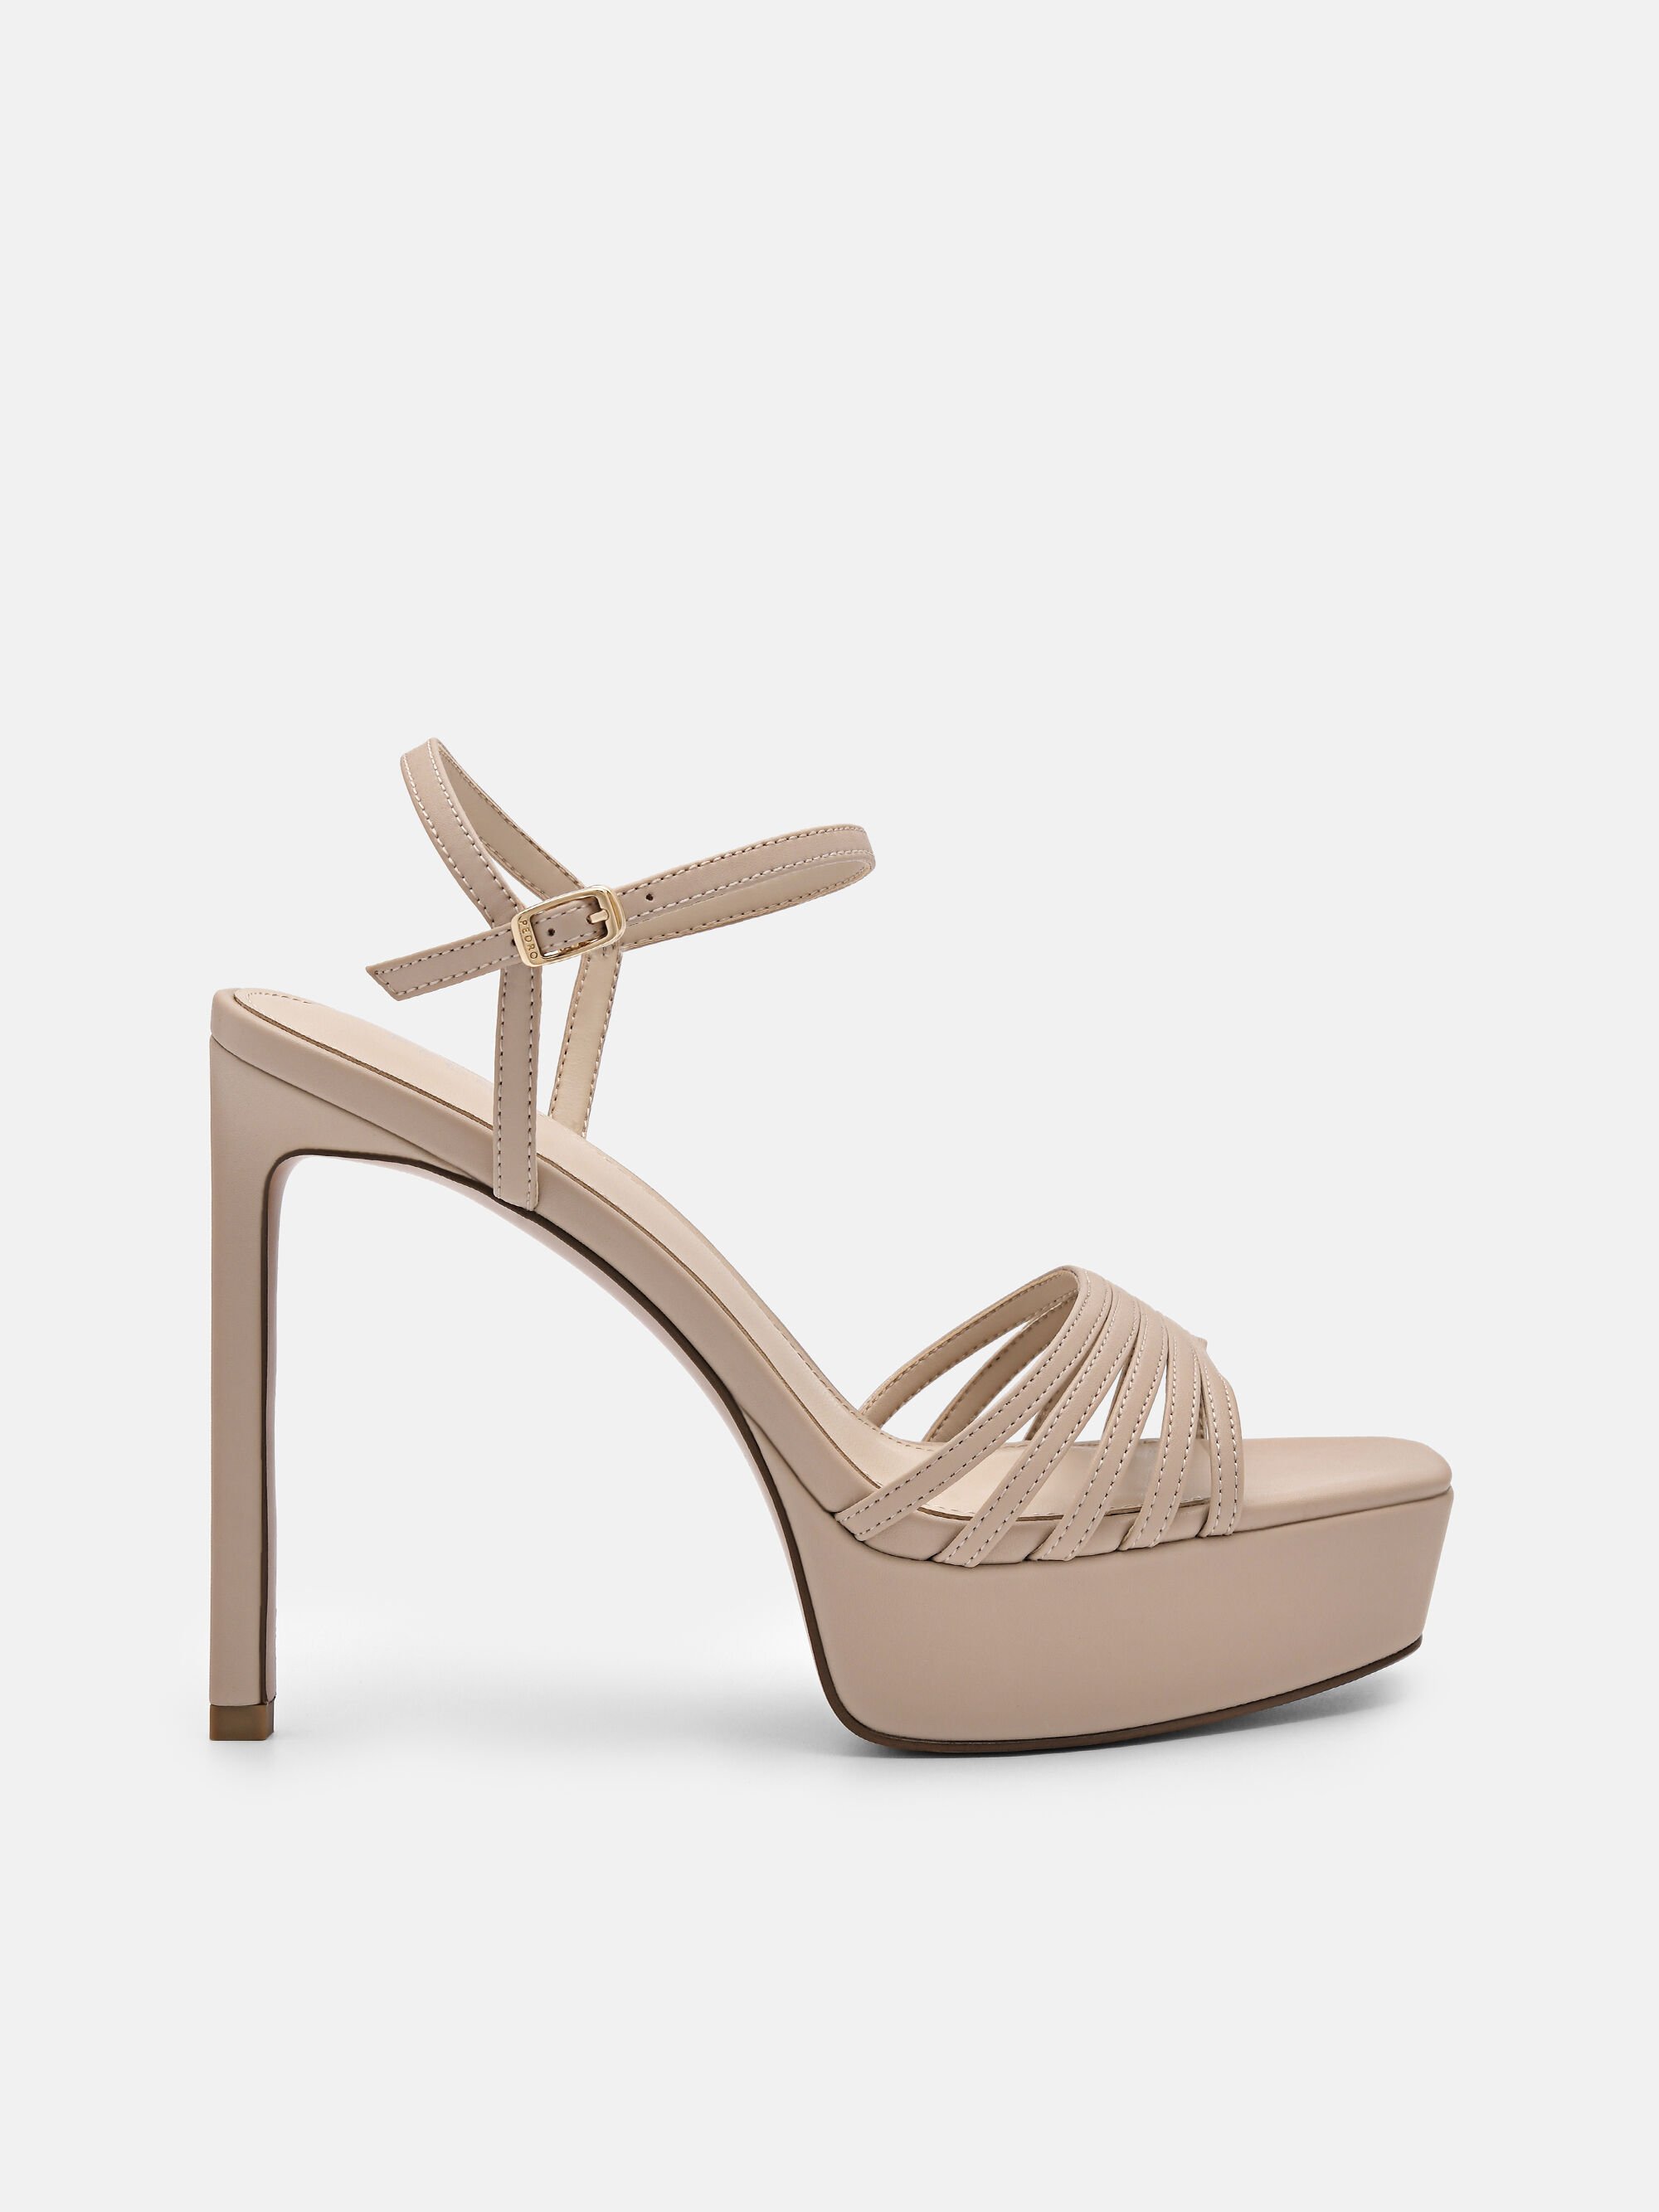 Nude Ankle-Strap Platform Pumps - CHARLES & KEITH CA